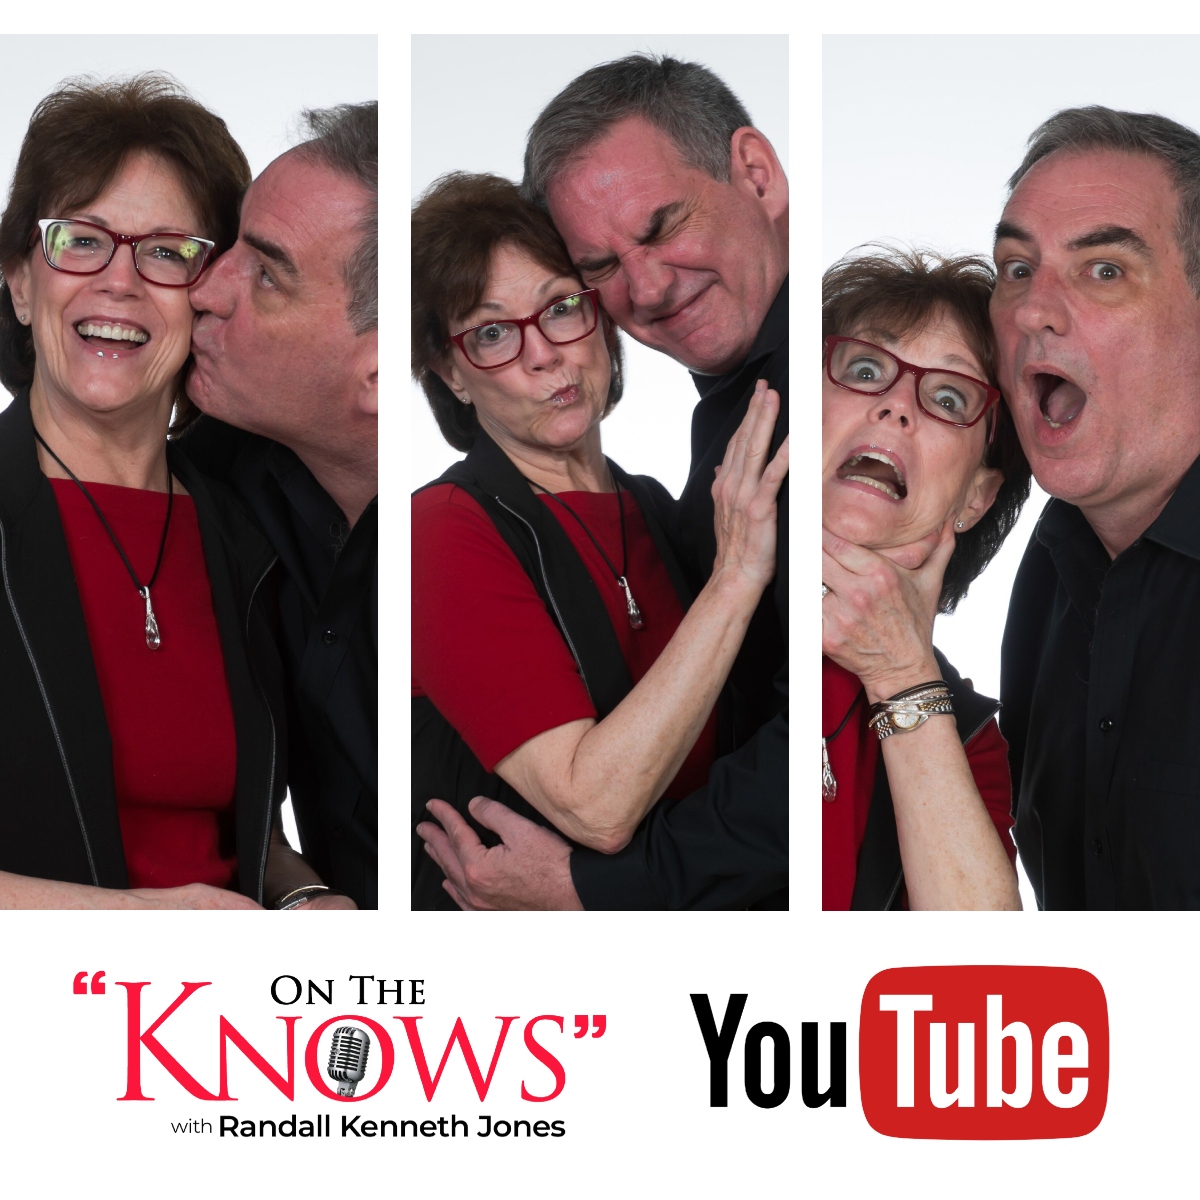 YES! #OnTheKnows is now on @YouTube! GO TO: ➡️➡️➡️youtube.com/c/RandallKenne… 

#Siri #talkshow #podcast #youtube #interviews #entertainment #talk #comedy #selfcare #thoughtleaders #media #tvshow #hollywood #edutainment #motivation #lifestyle #art #news #funny #inspiration #books